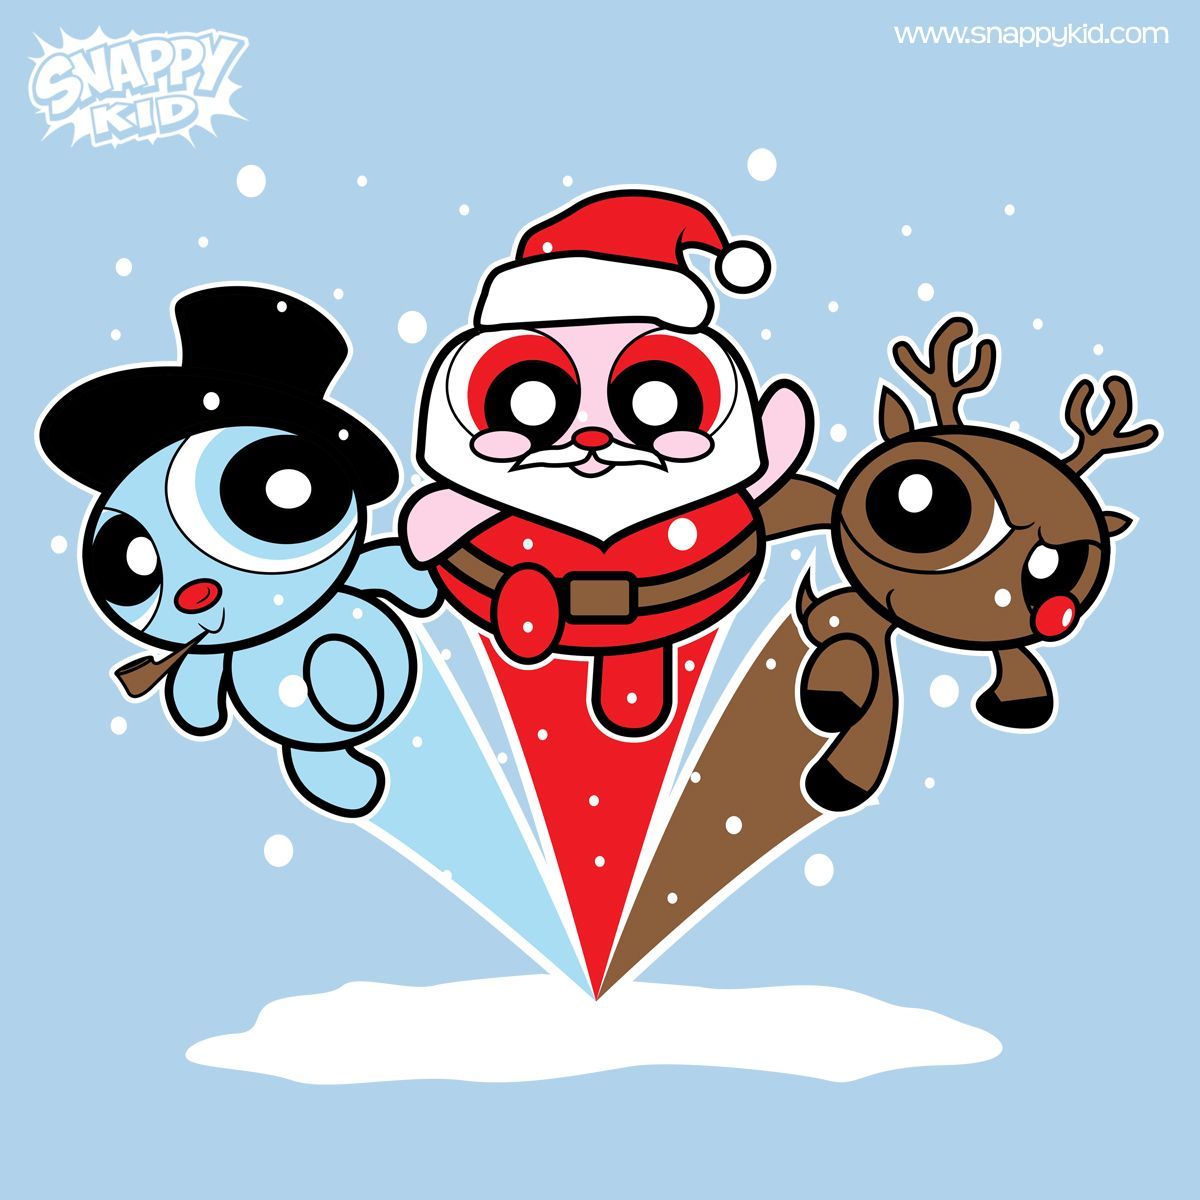 A Mash Up Between Three Favorite Christmas Heroes And The Powerpuff Girls. Christmas Puff Light Blue T Shirts An. Book Origami, Powerpuff Girls, Painting Of Girl